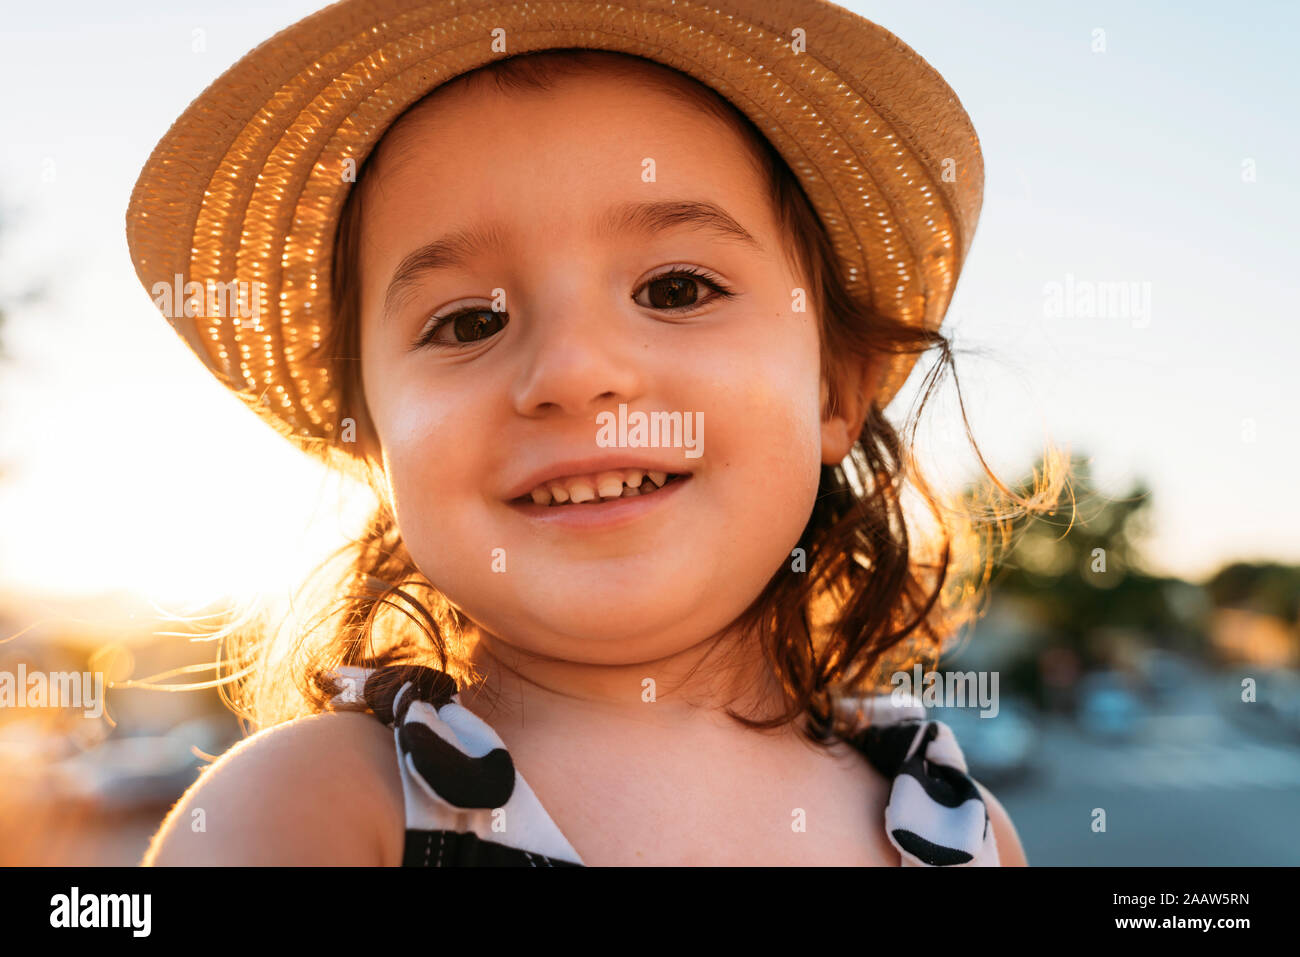 Portrait of smiling little girl wearing straw hat at sunset Stock Photo